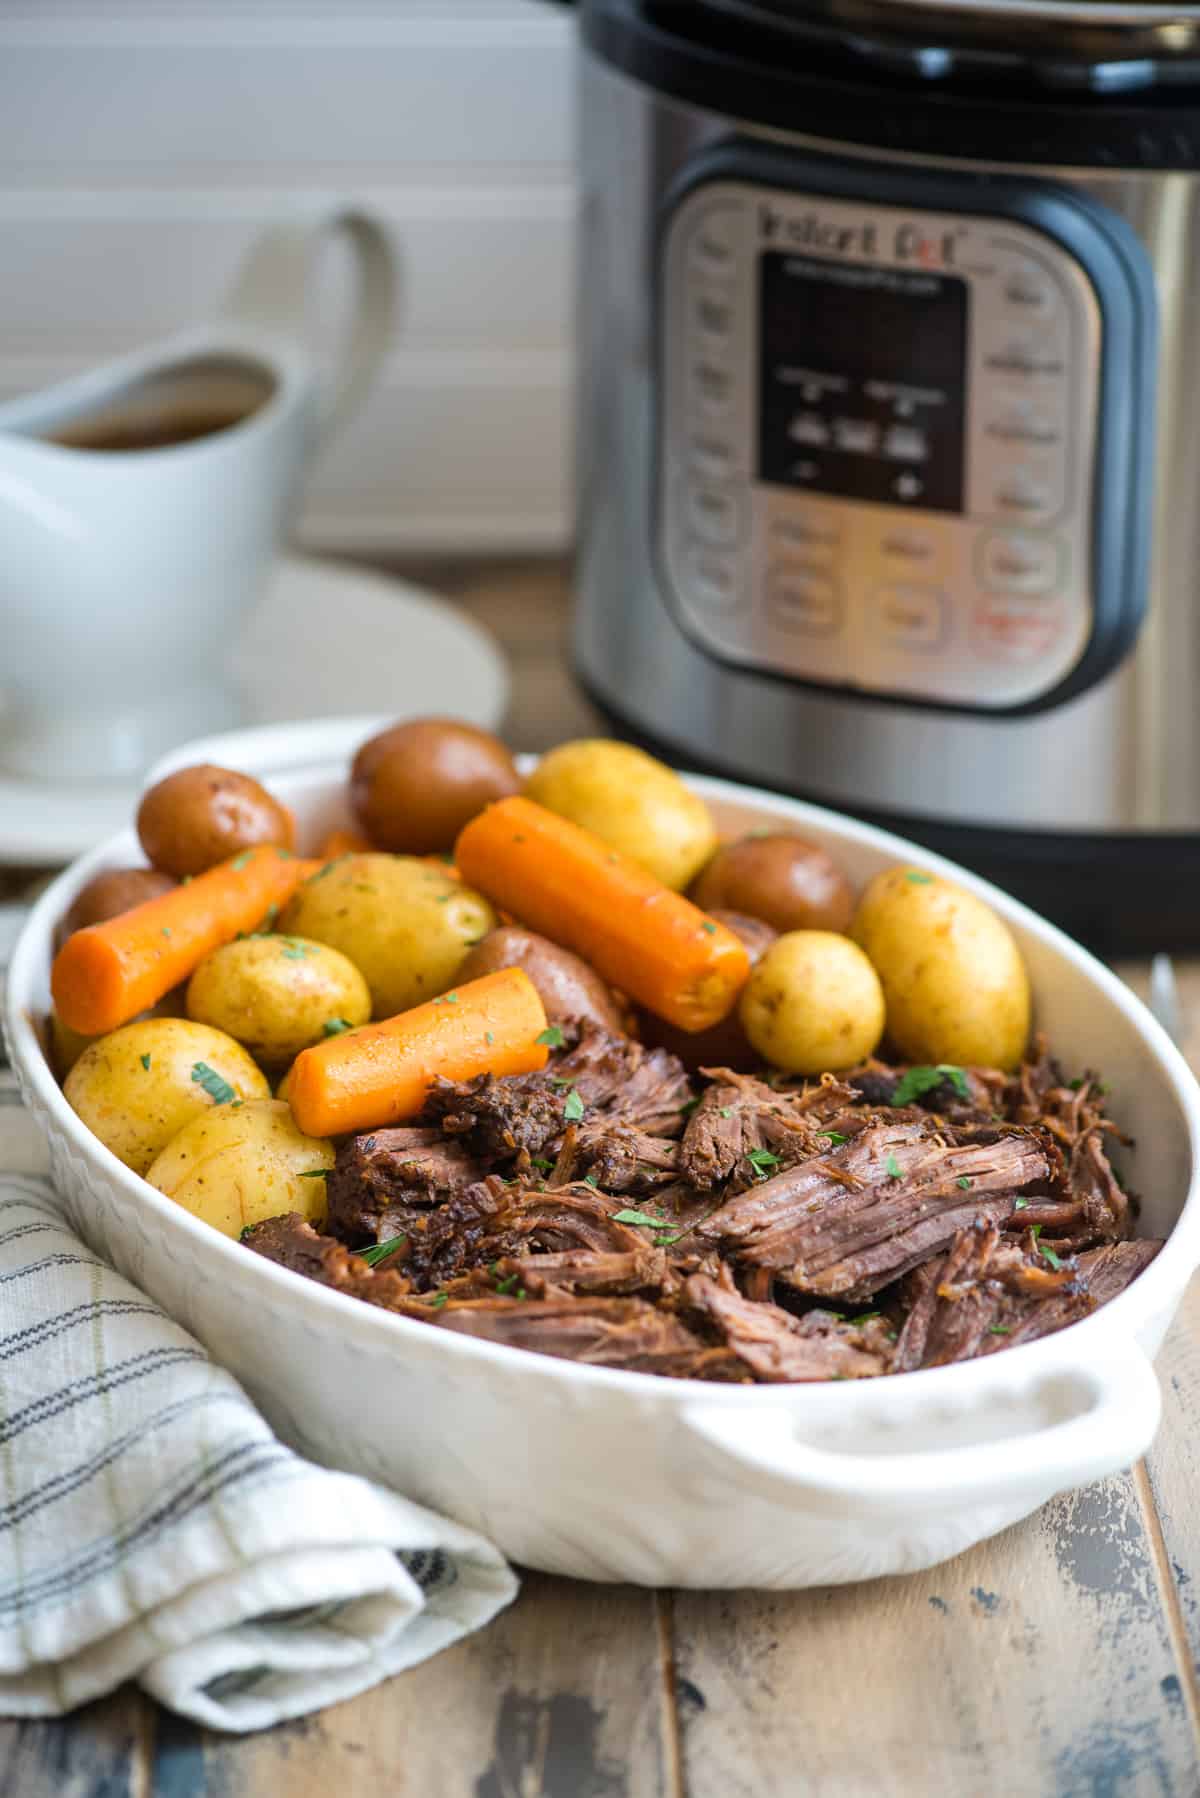 Pot roast with carrots and potatoes in a white serving dish with an Instant Pot in the background.